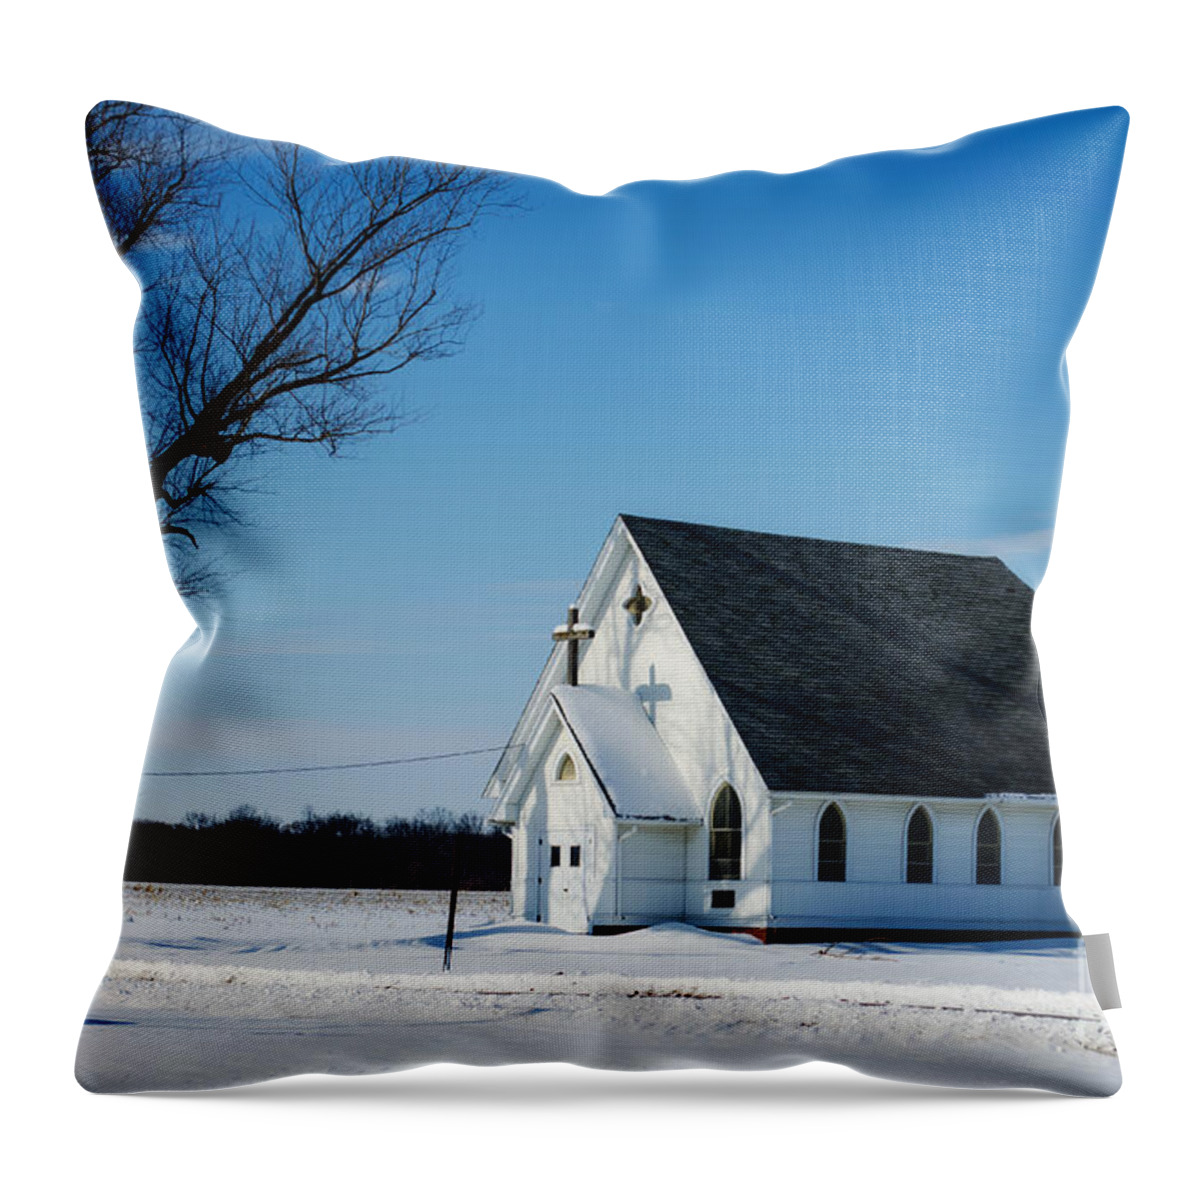 Little Church On The Prairie Throw Pillow featuring the photograph Little Church On The Prairie by Luther Fine Art